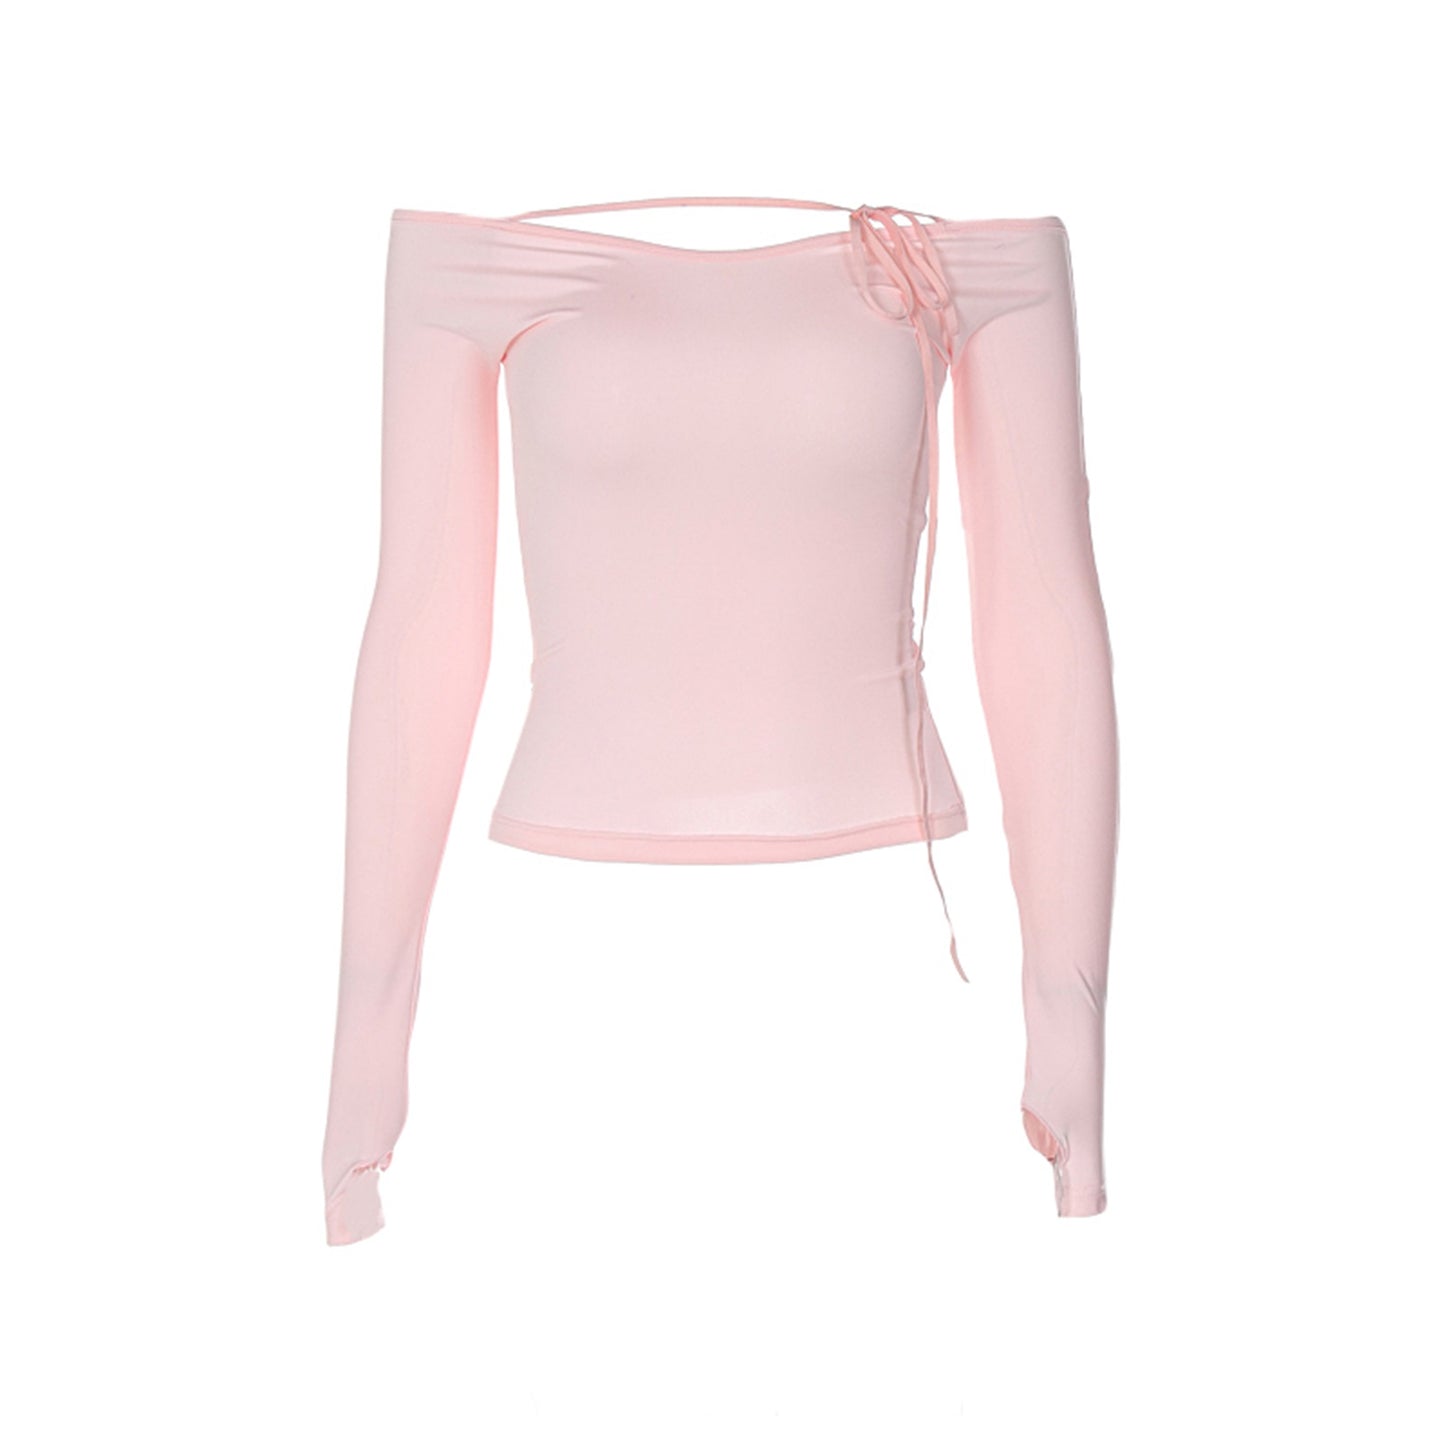 Black Pink Knitted Sweater Slim Top - Heartzcore